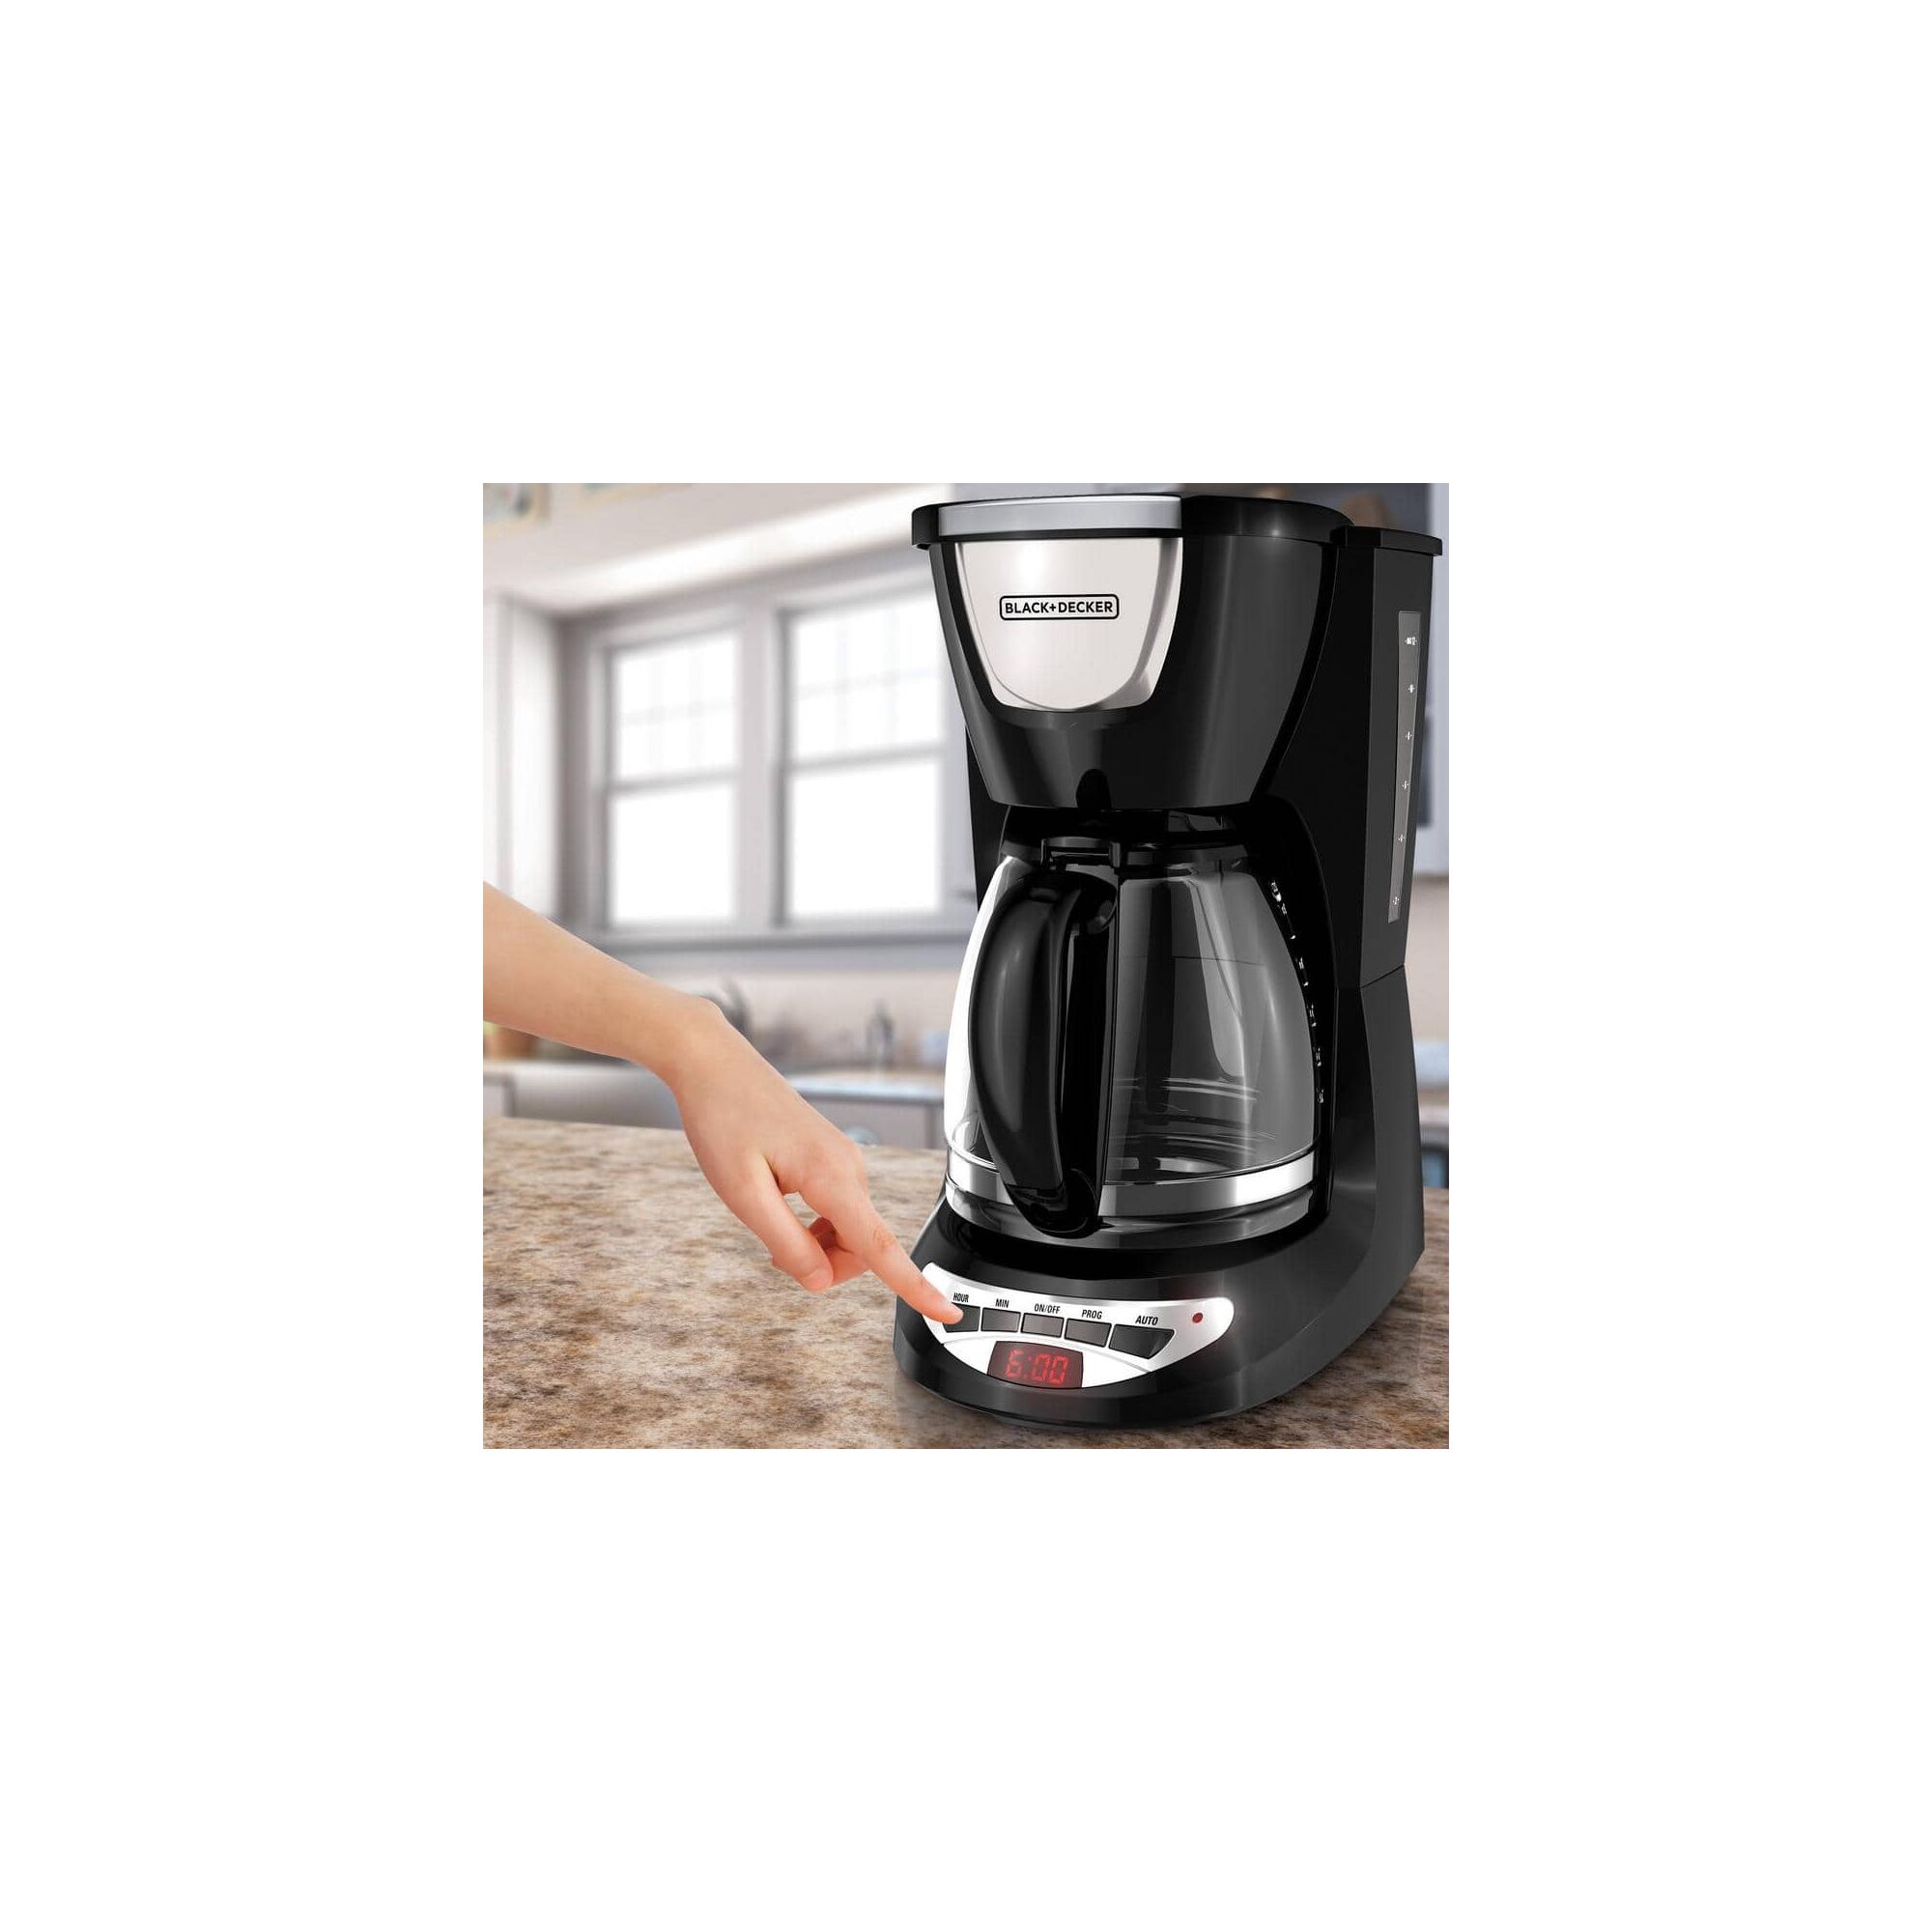 Person pushing the controls of the BLACK+DECKER coffee maker